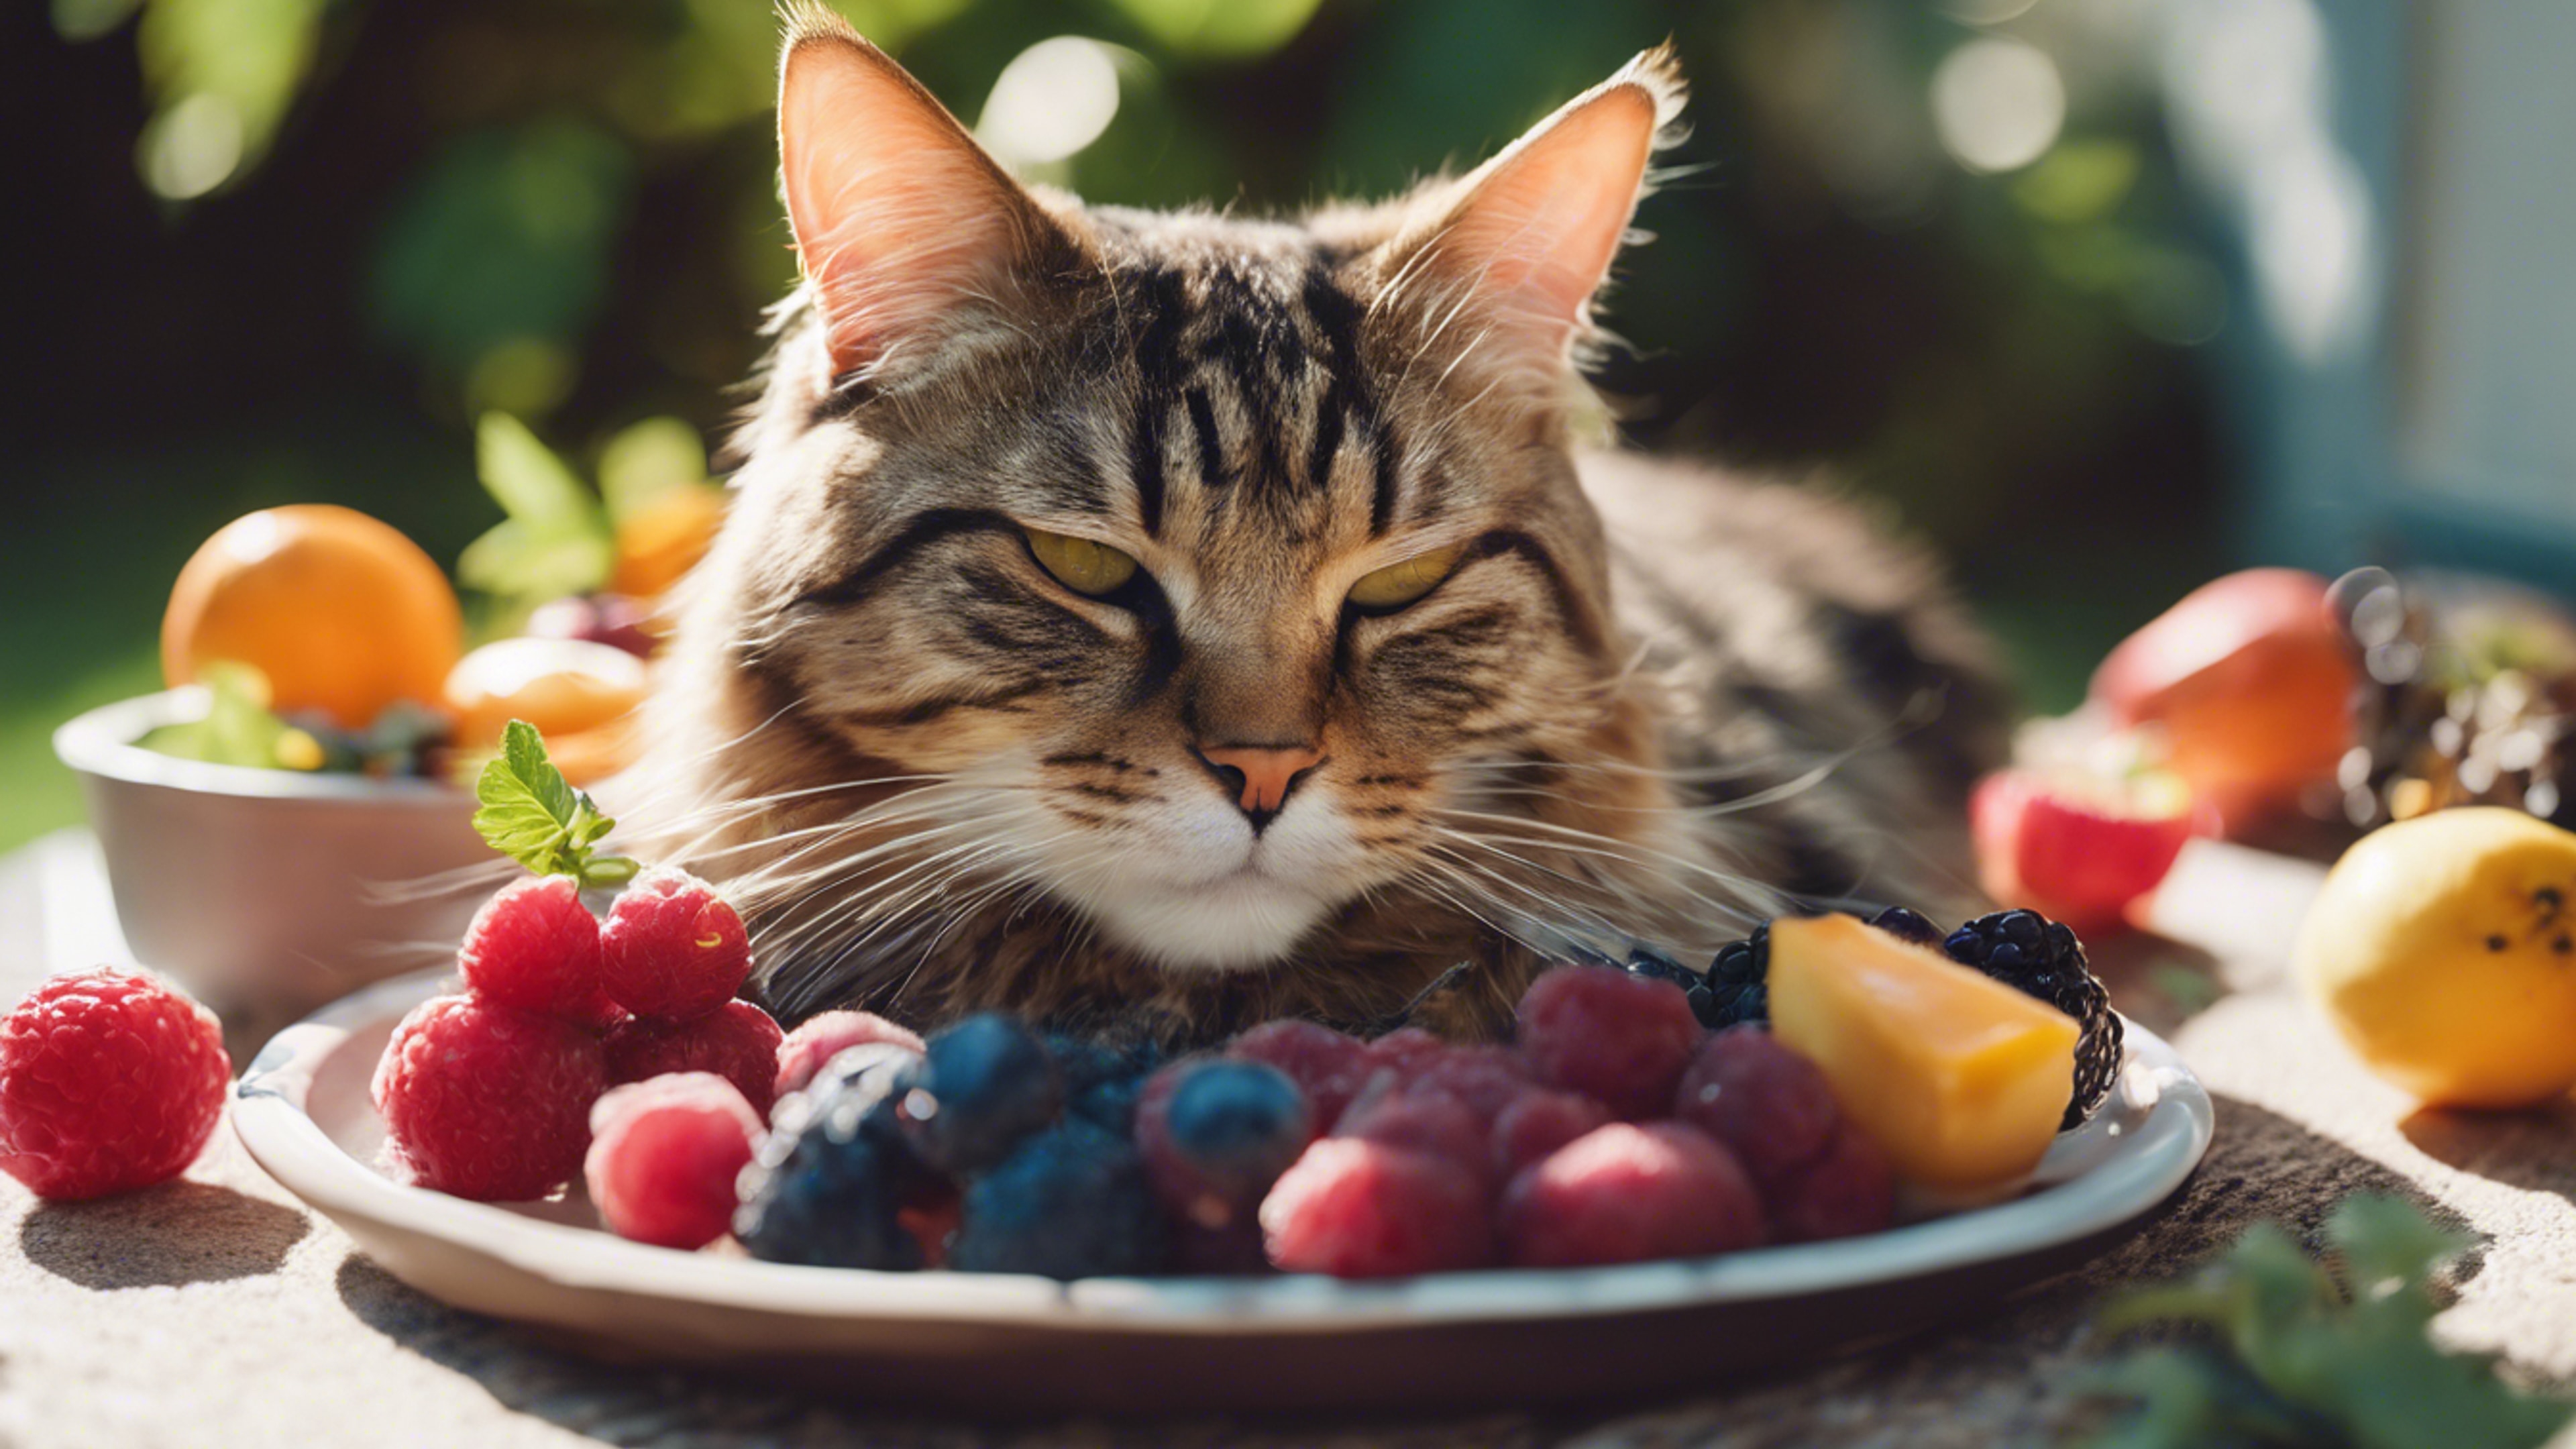 A sleepy Maine Coon cat relaxing next to a bowl of vibrant summer fruits. Wallpaper[5a3905f0581c45108121]